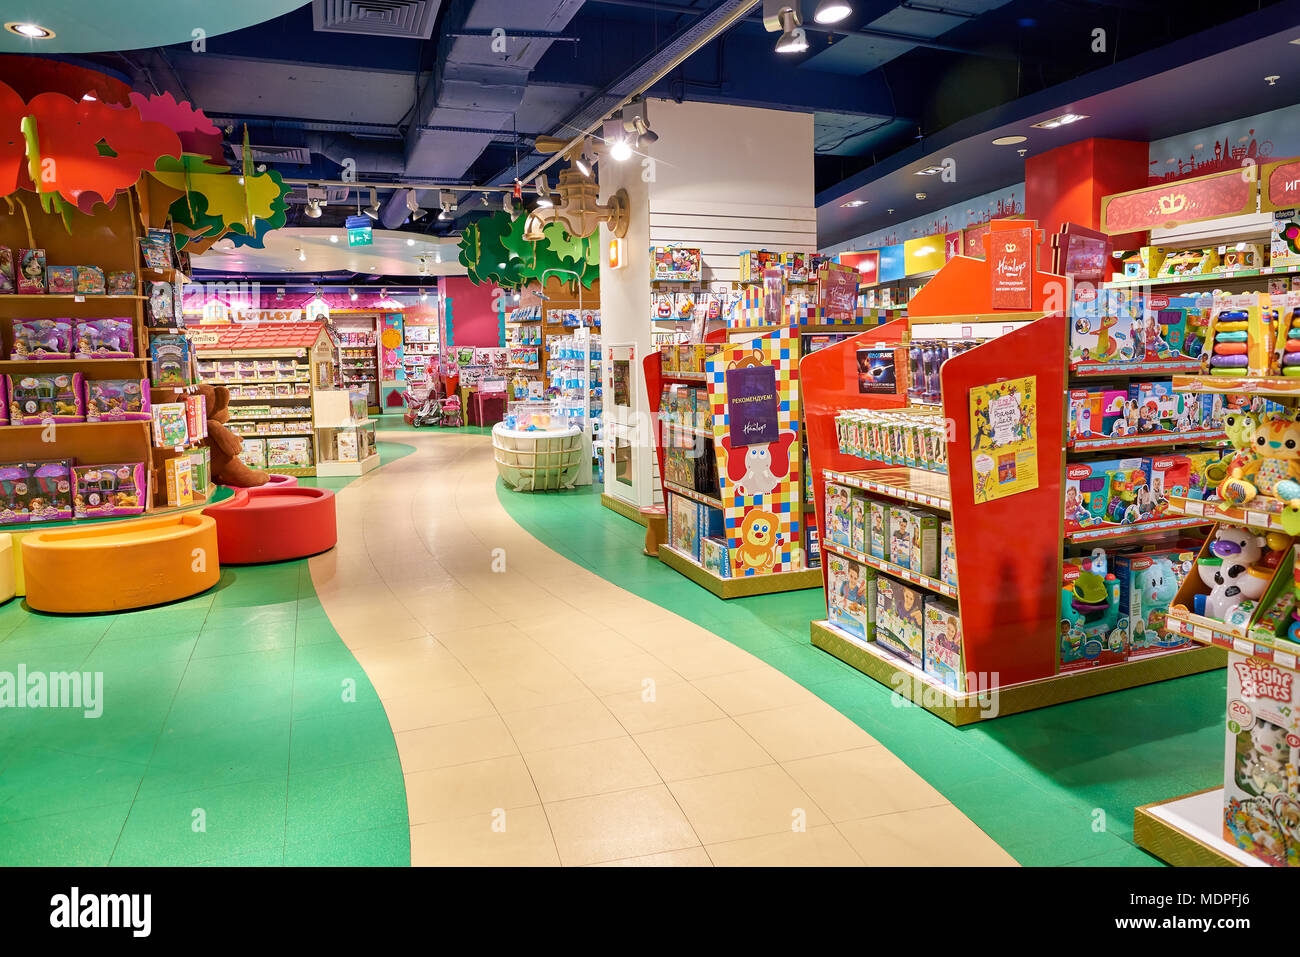 SAINT PETERSBURG, RUSSIA - CIRCA OCTOBER, 2017: inside a Hamleys toy store in St. Petersburg. Hamleys is the oldest and largest toy shop in the world  Stock Photo